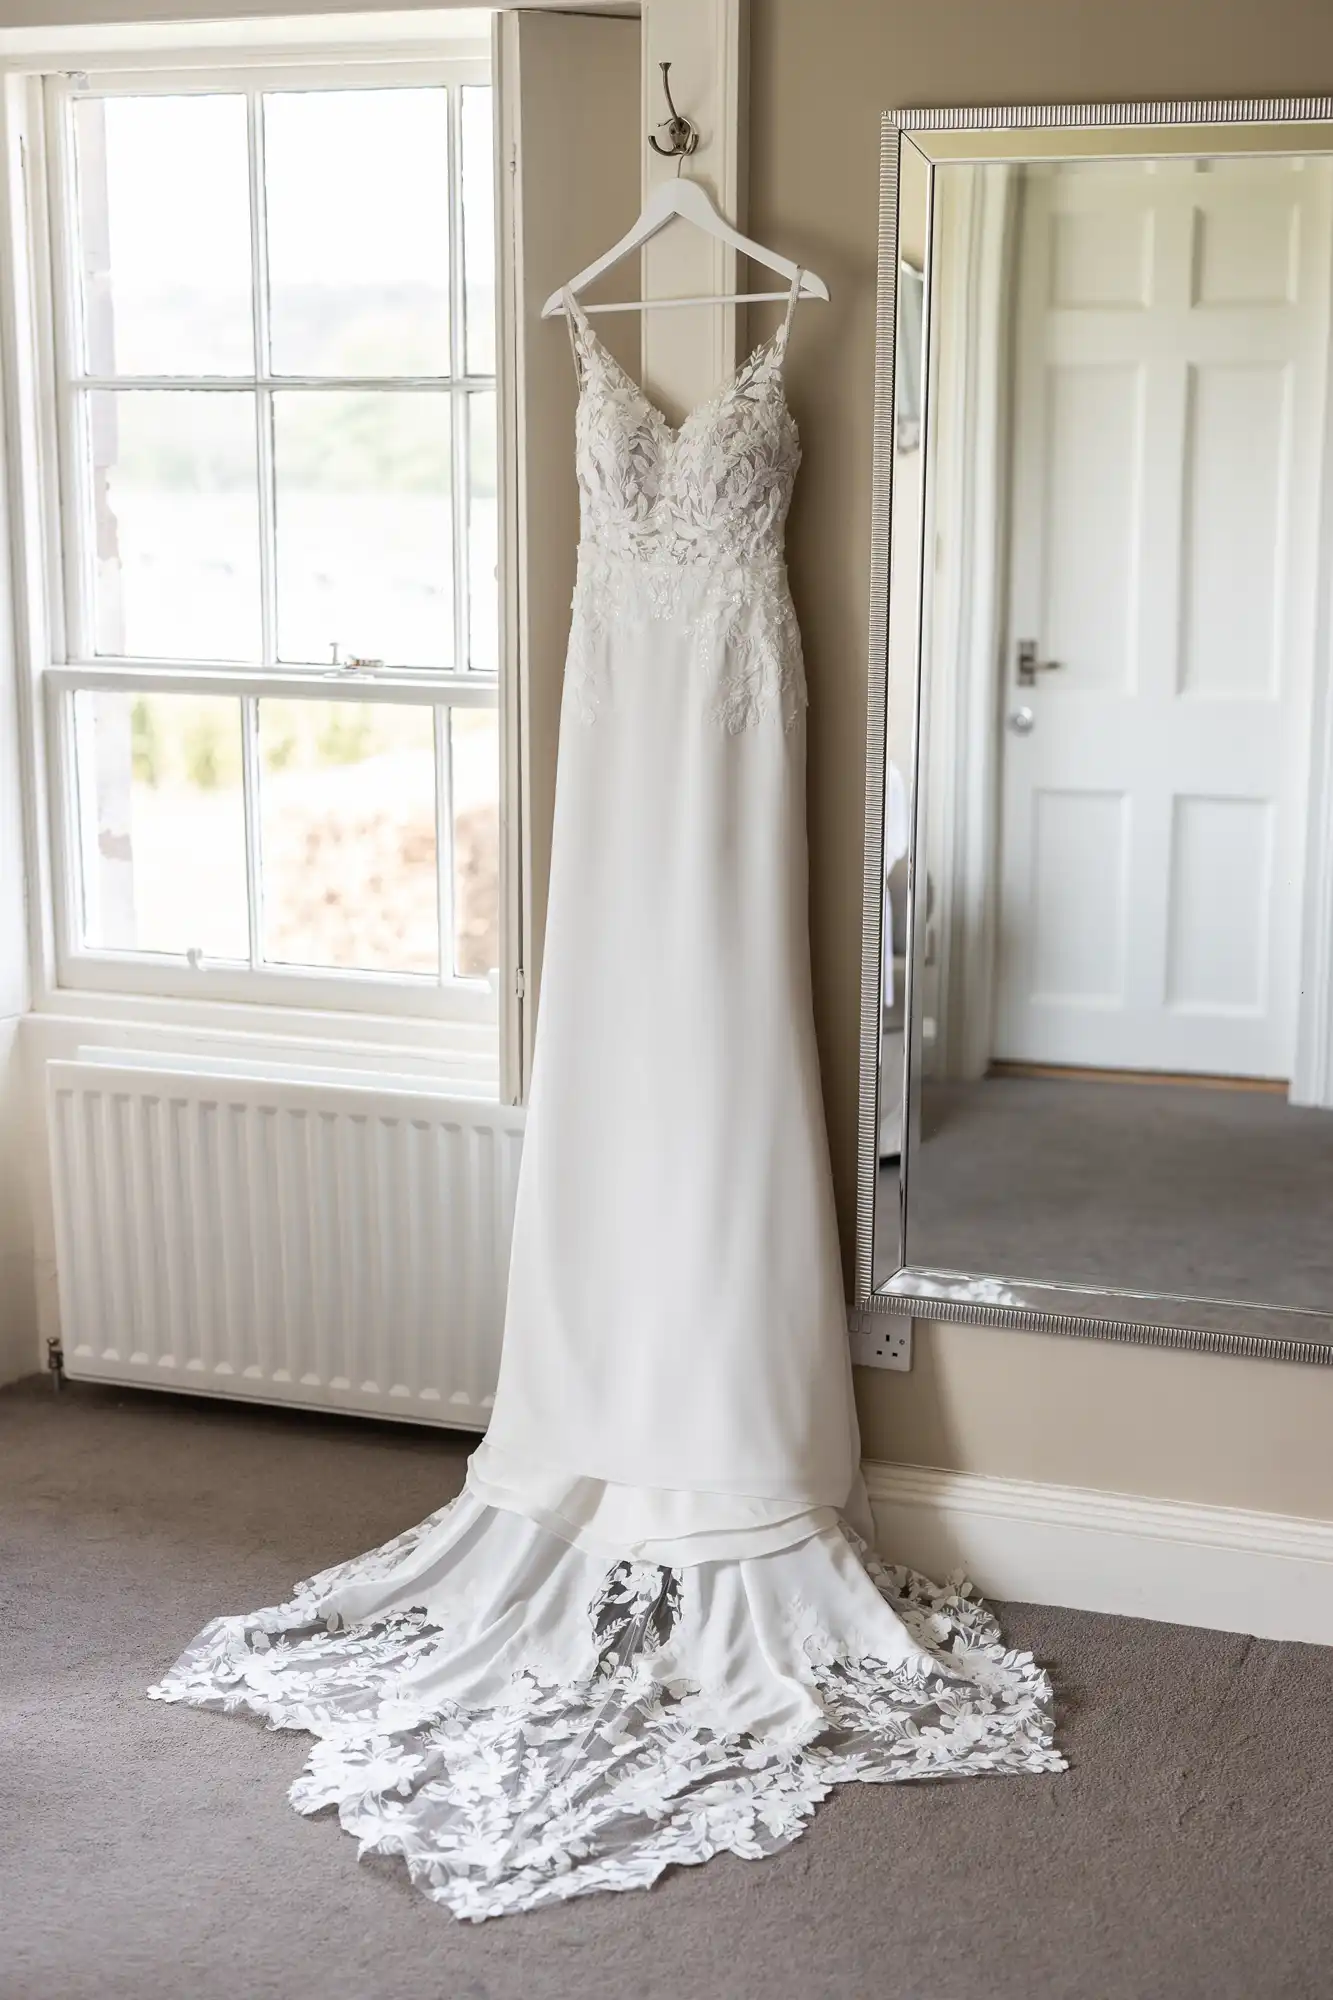 A white wedding dress with a lace bodice and a long train hangs on a hanger against a beige wall next to a large mirror.